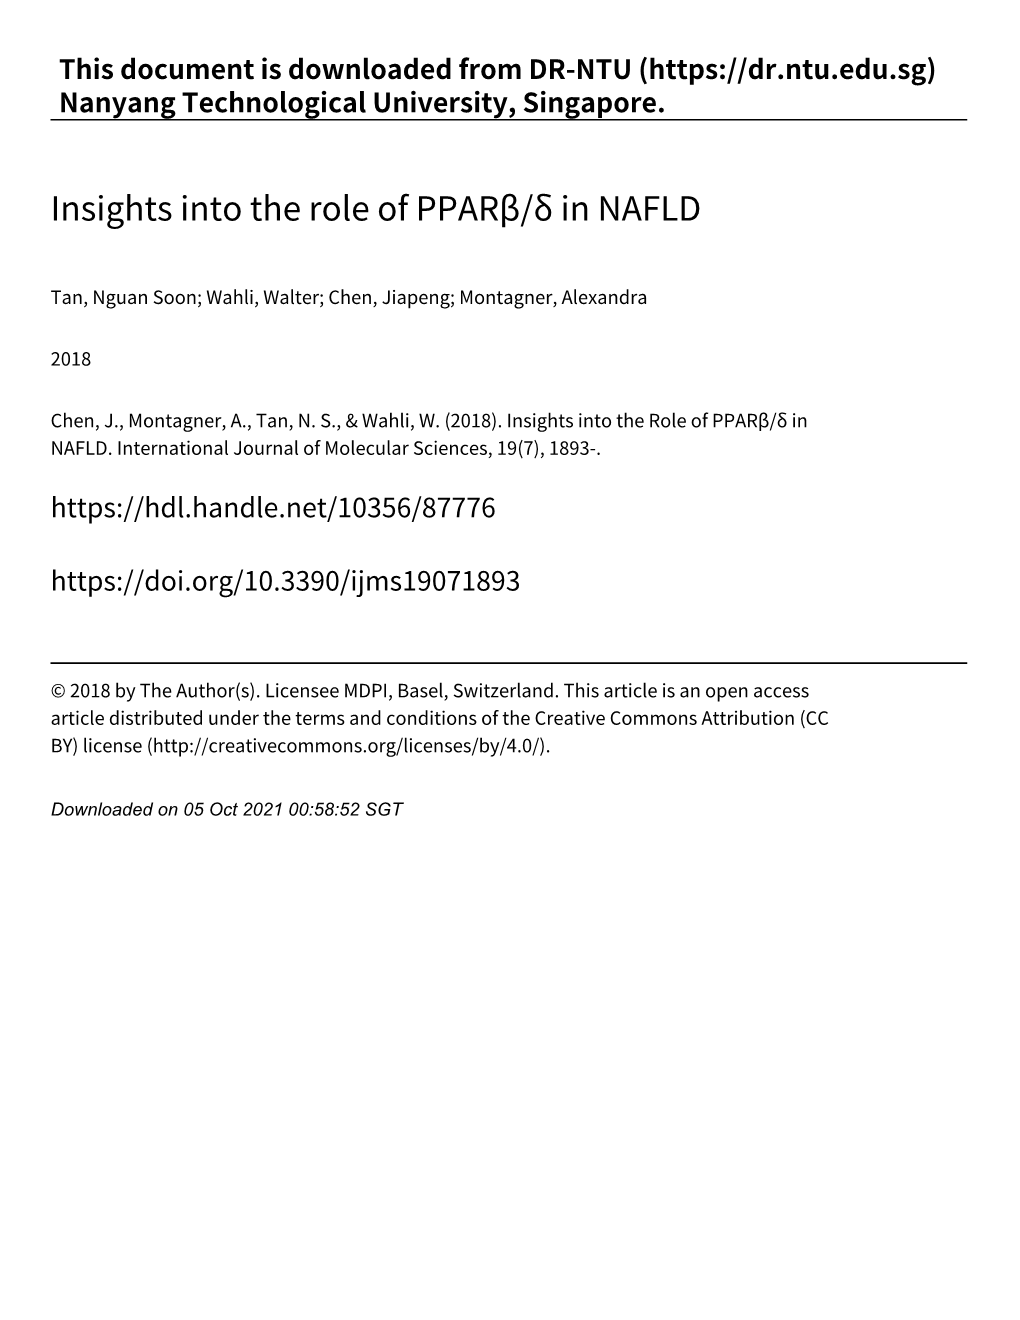 Insights Into the Role of Pparβ/Δ in NAFLD